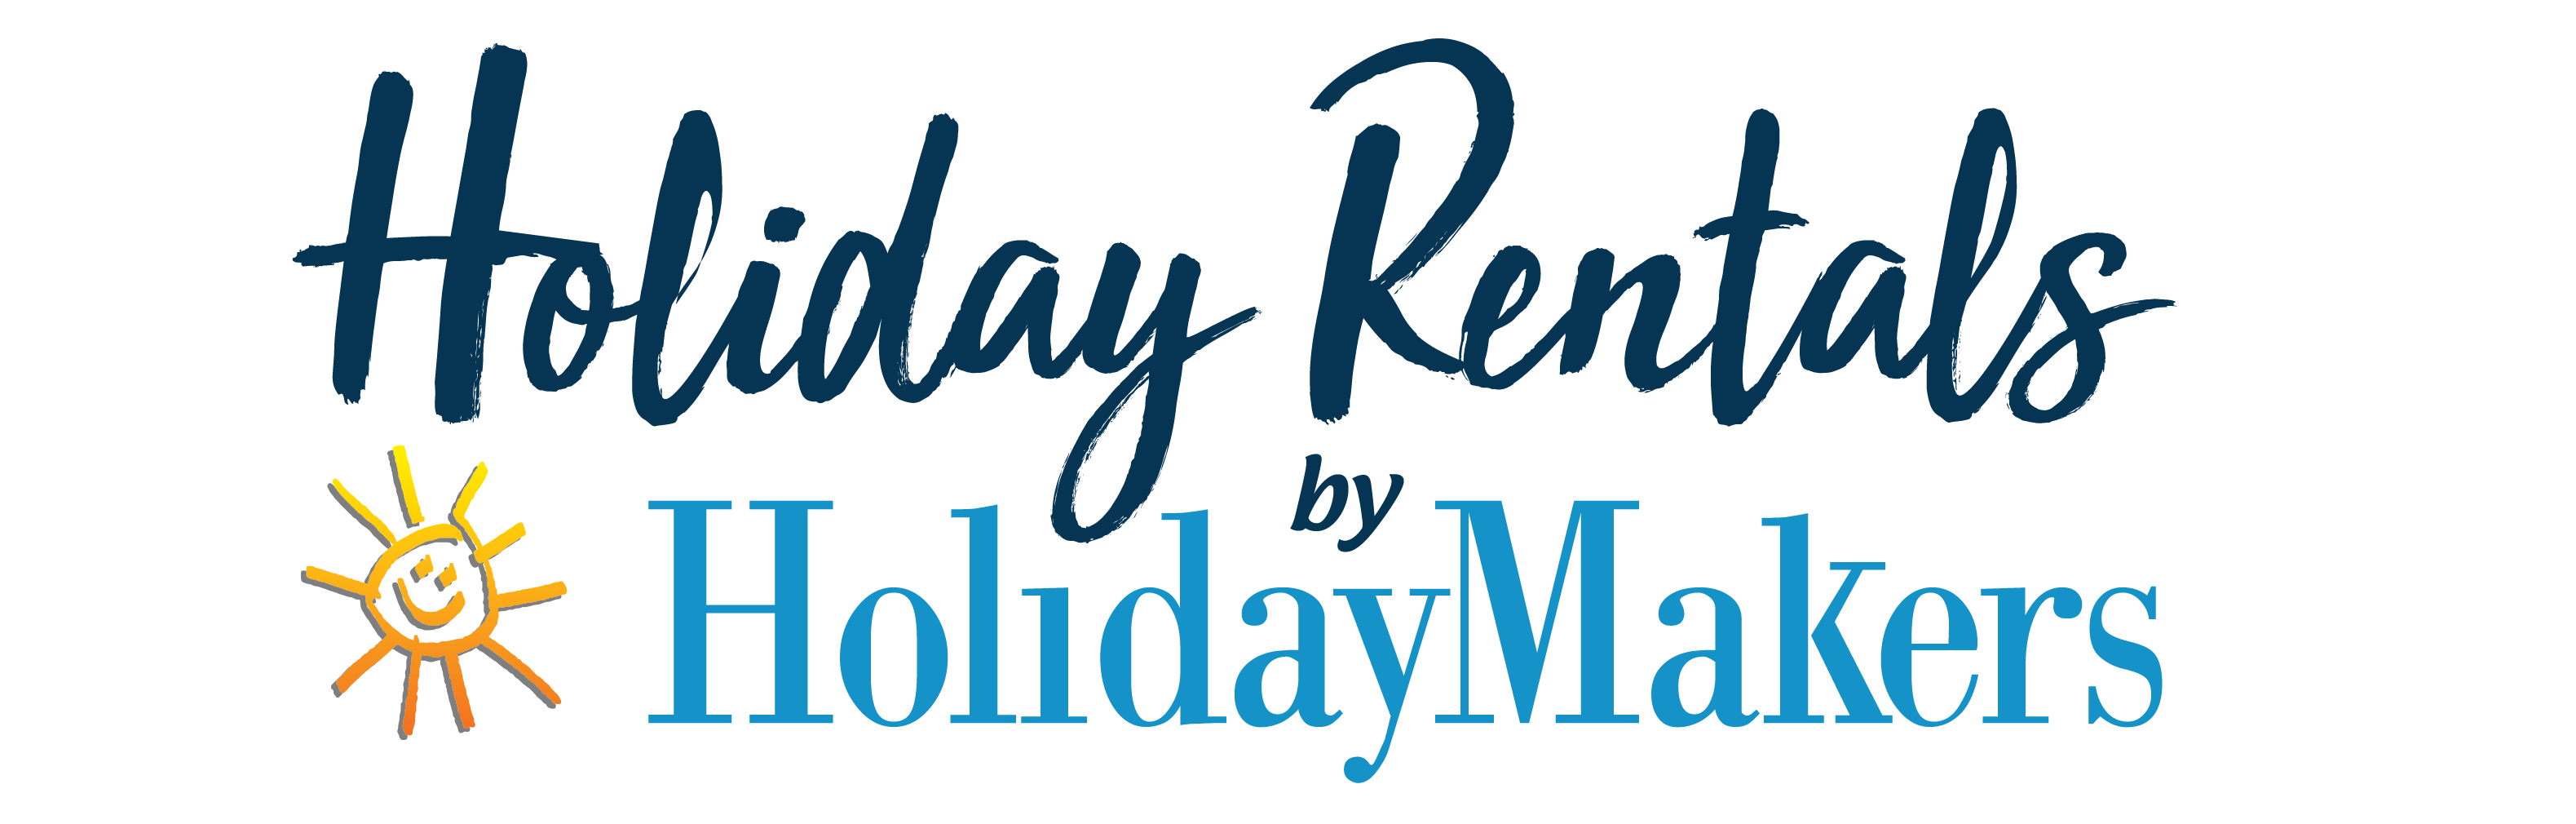 Holiday Rentals by Holiday Makers